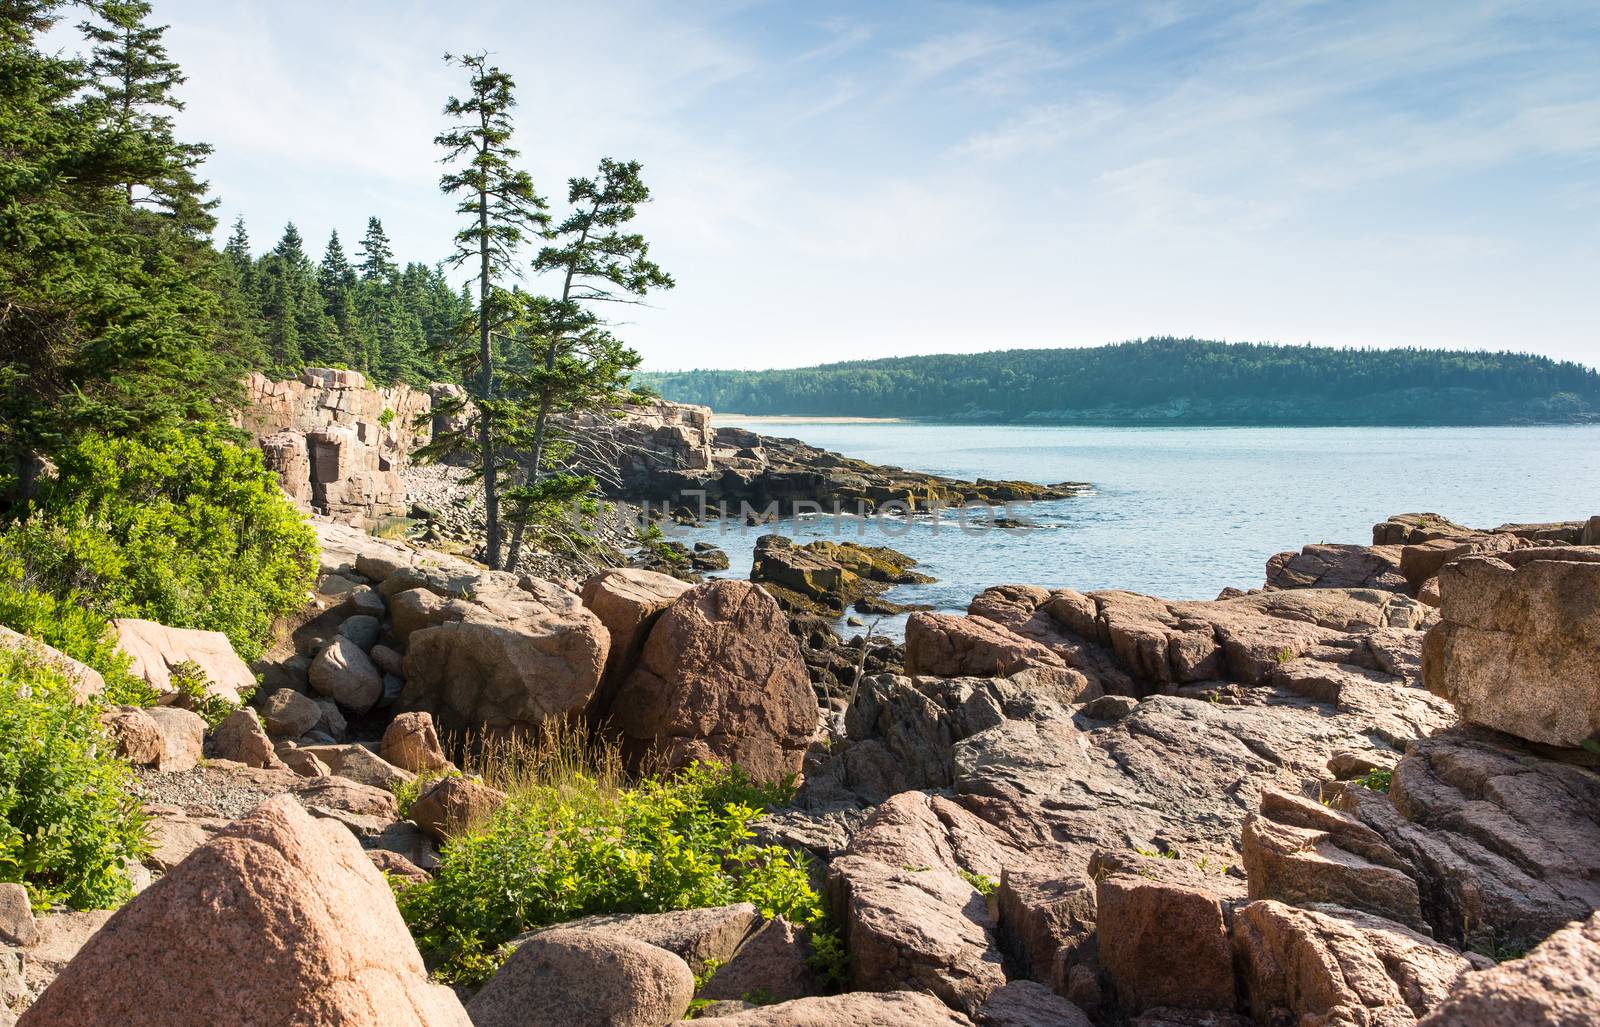 This image shows a beautiful combination of foliage, rocks, water and sky on the shoreline of Acadia National Park.